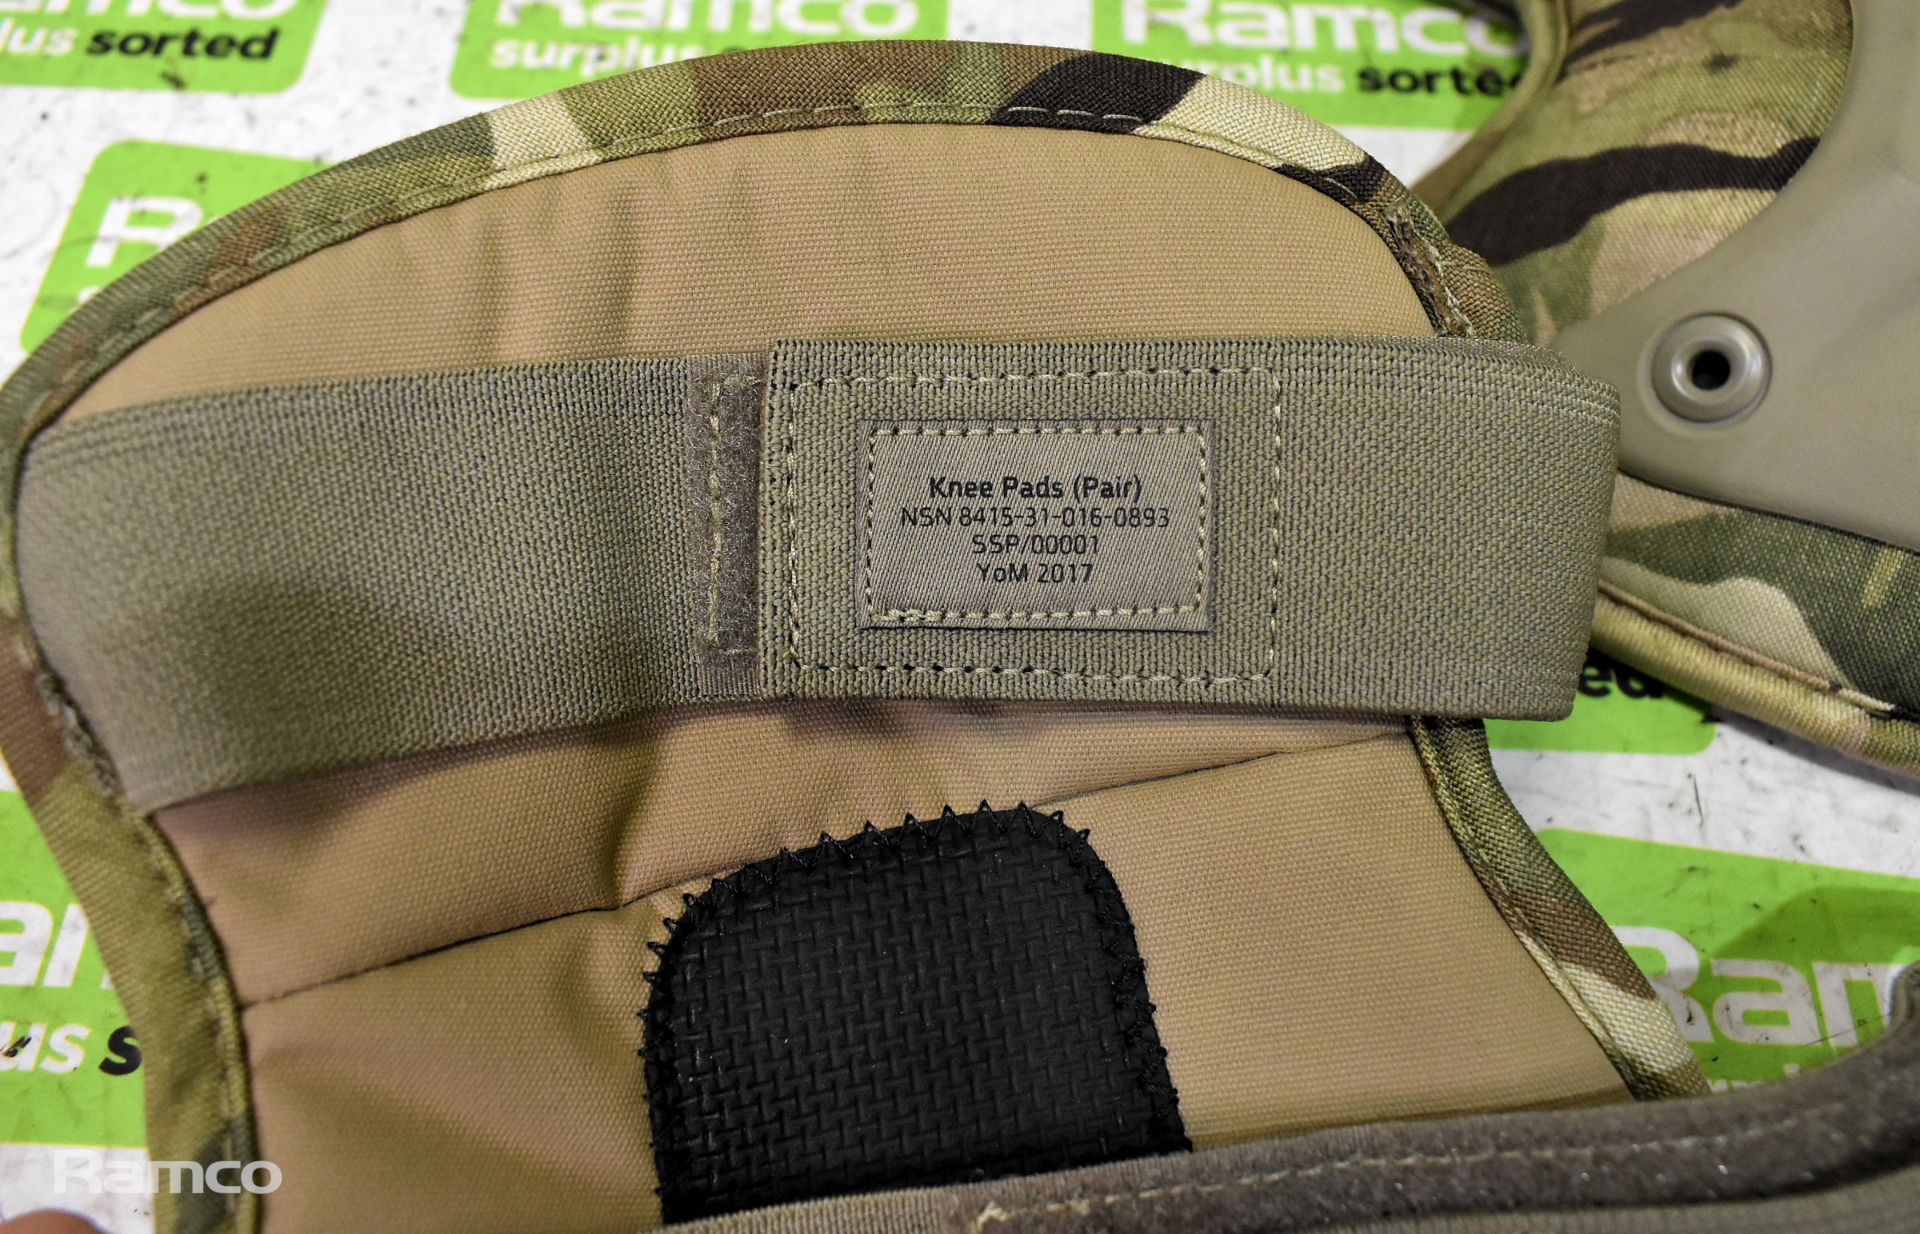 16x British Army MTP knee pads - mixed grades - Image 3 of 6